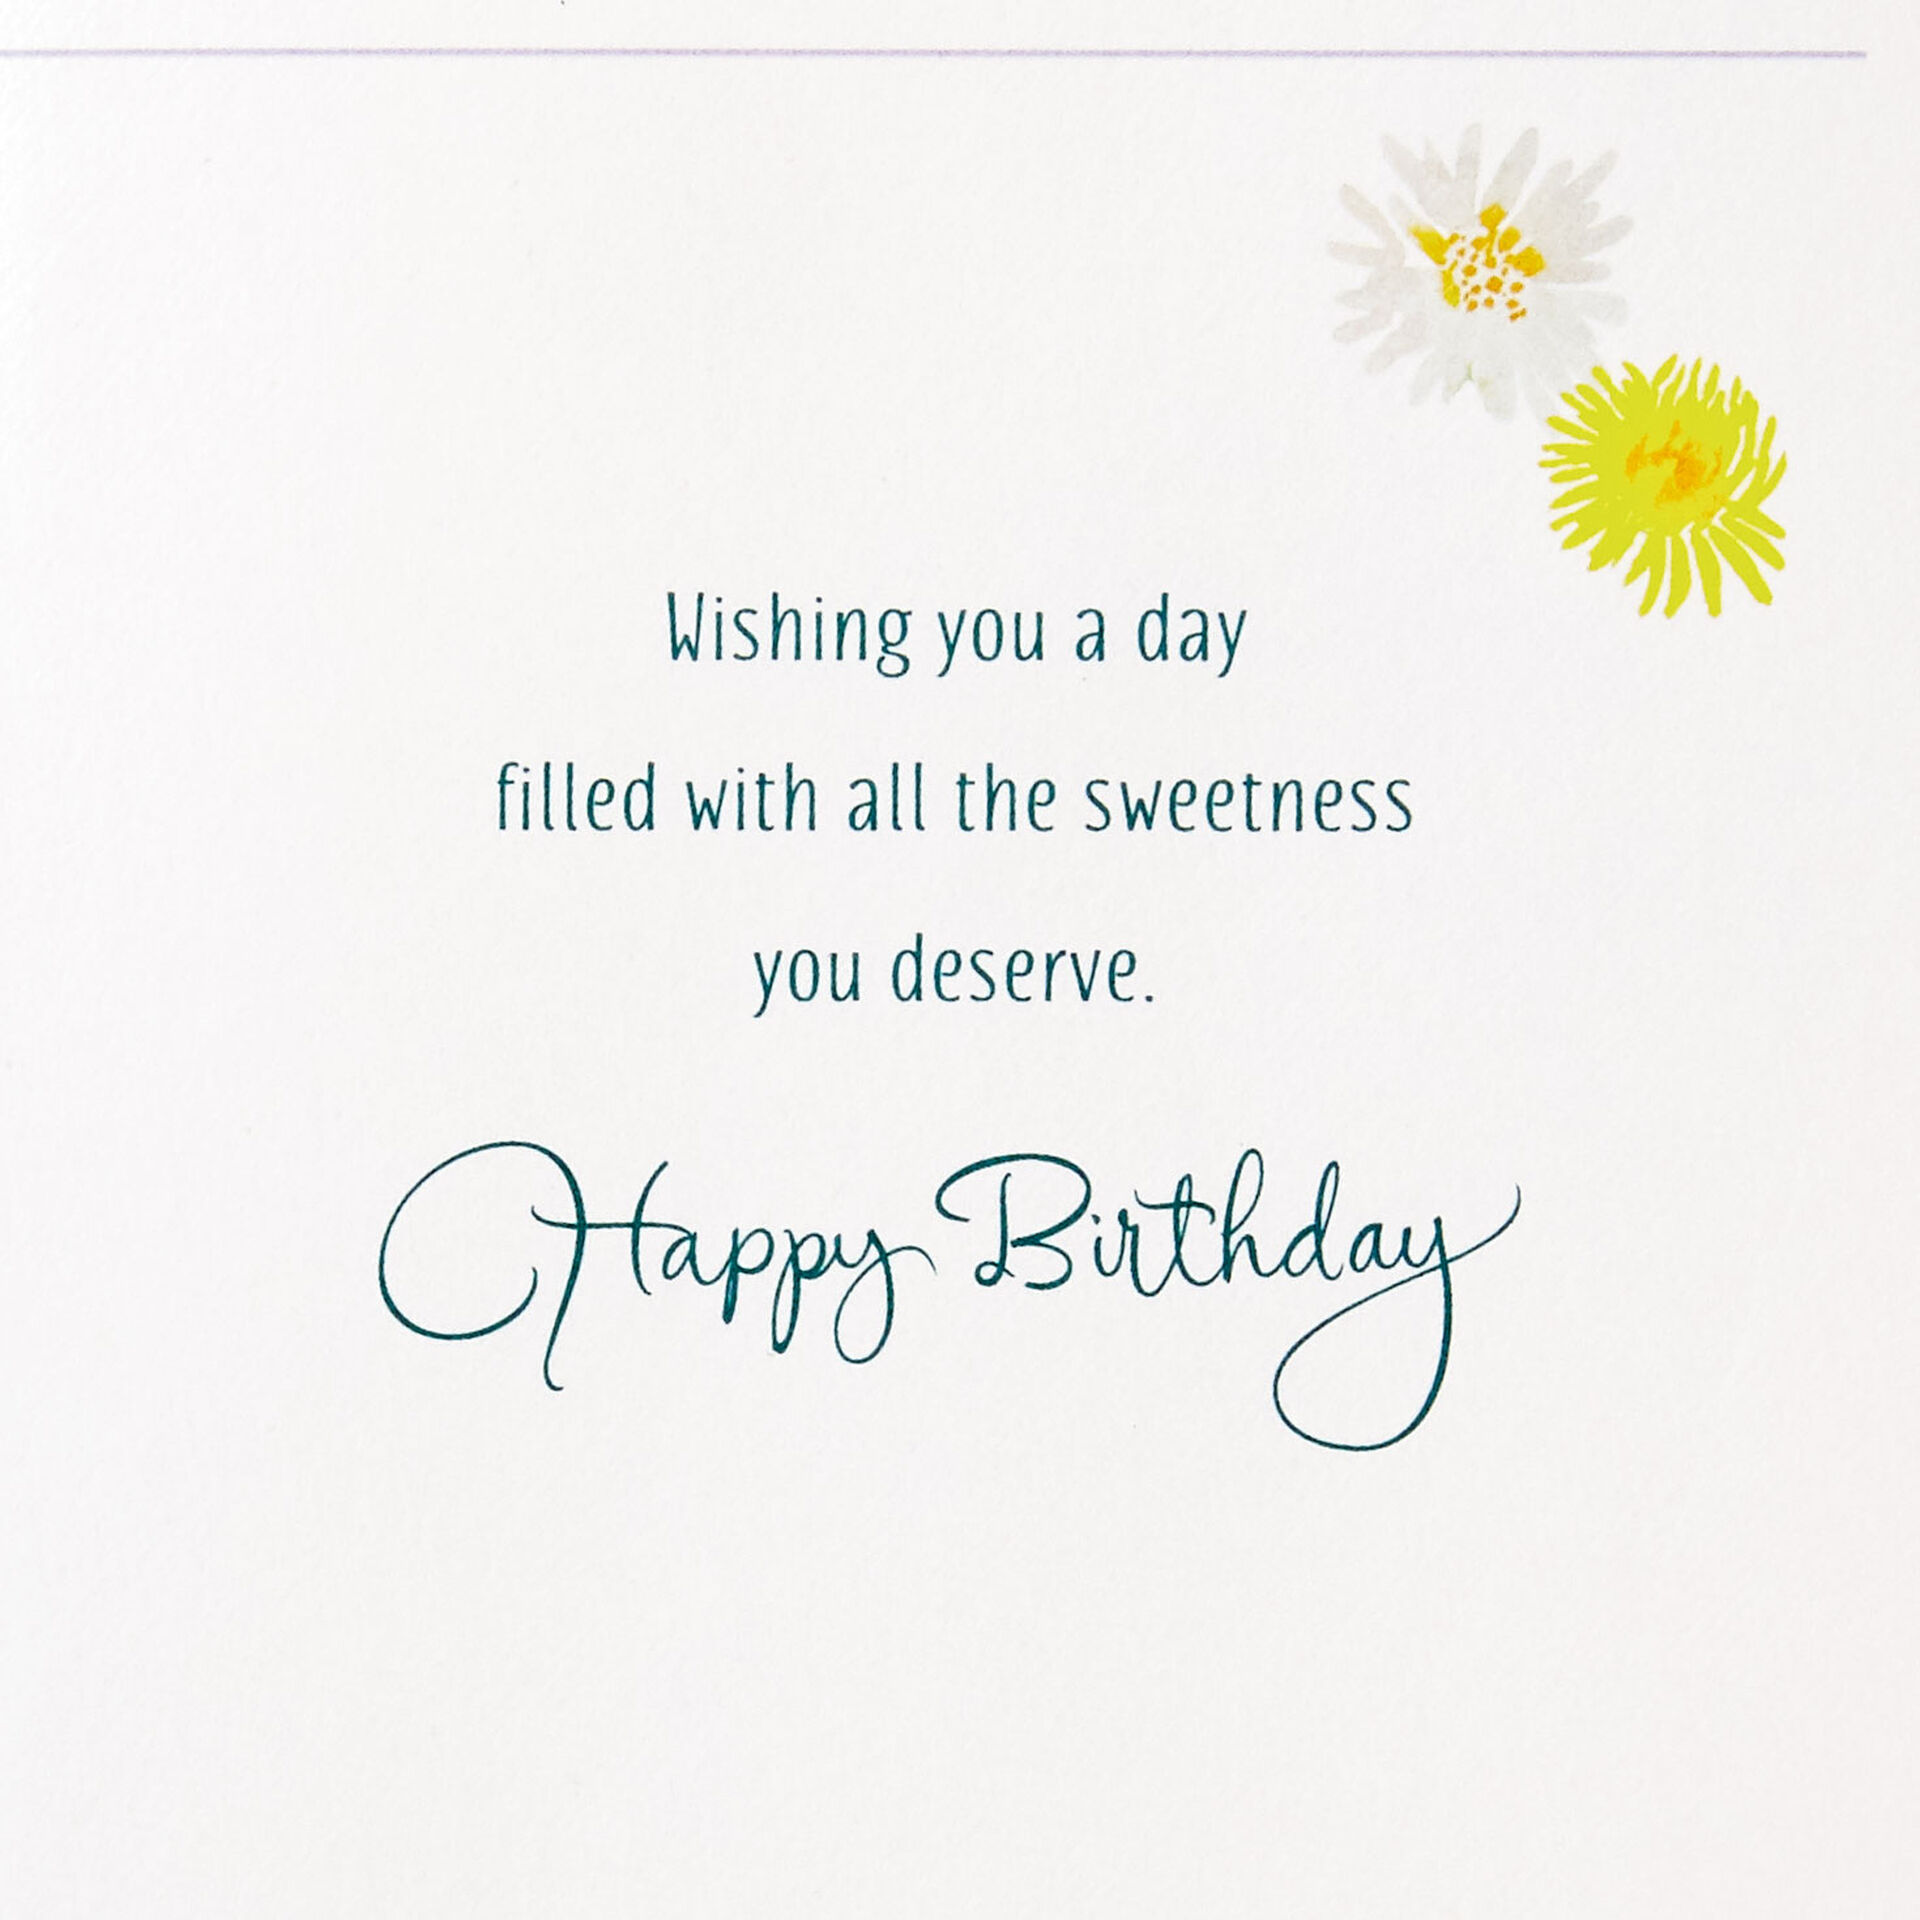 Cupcake-with-Vines-Birthday-Card-for-Her_599HBD3299_02